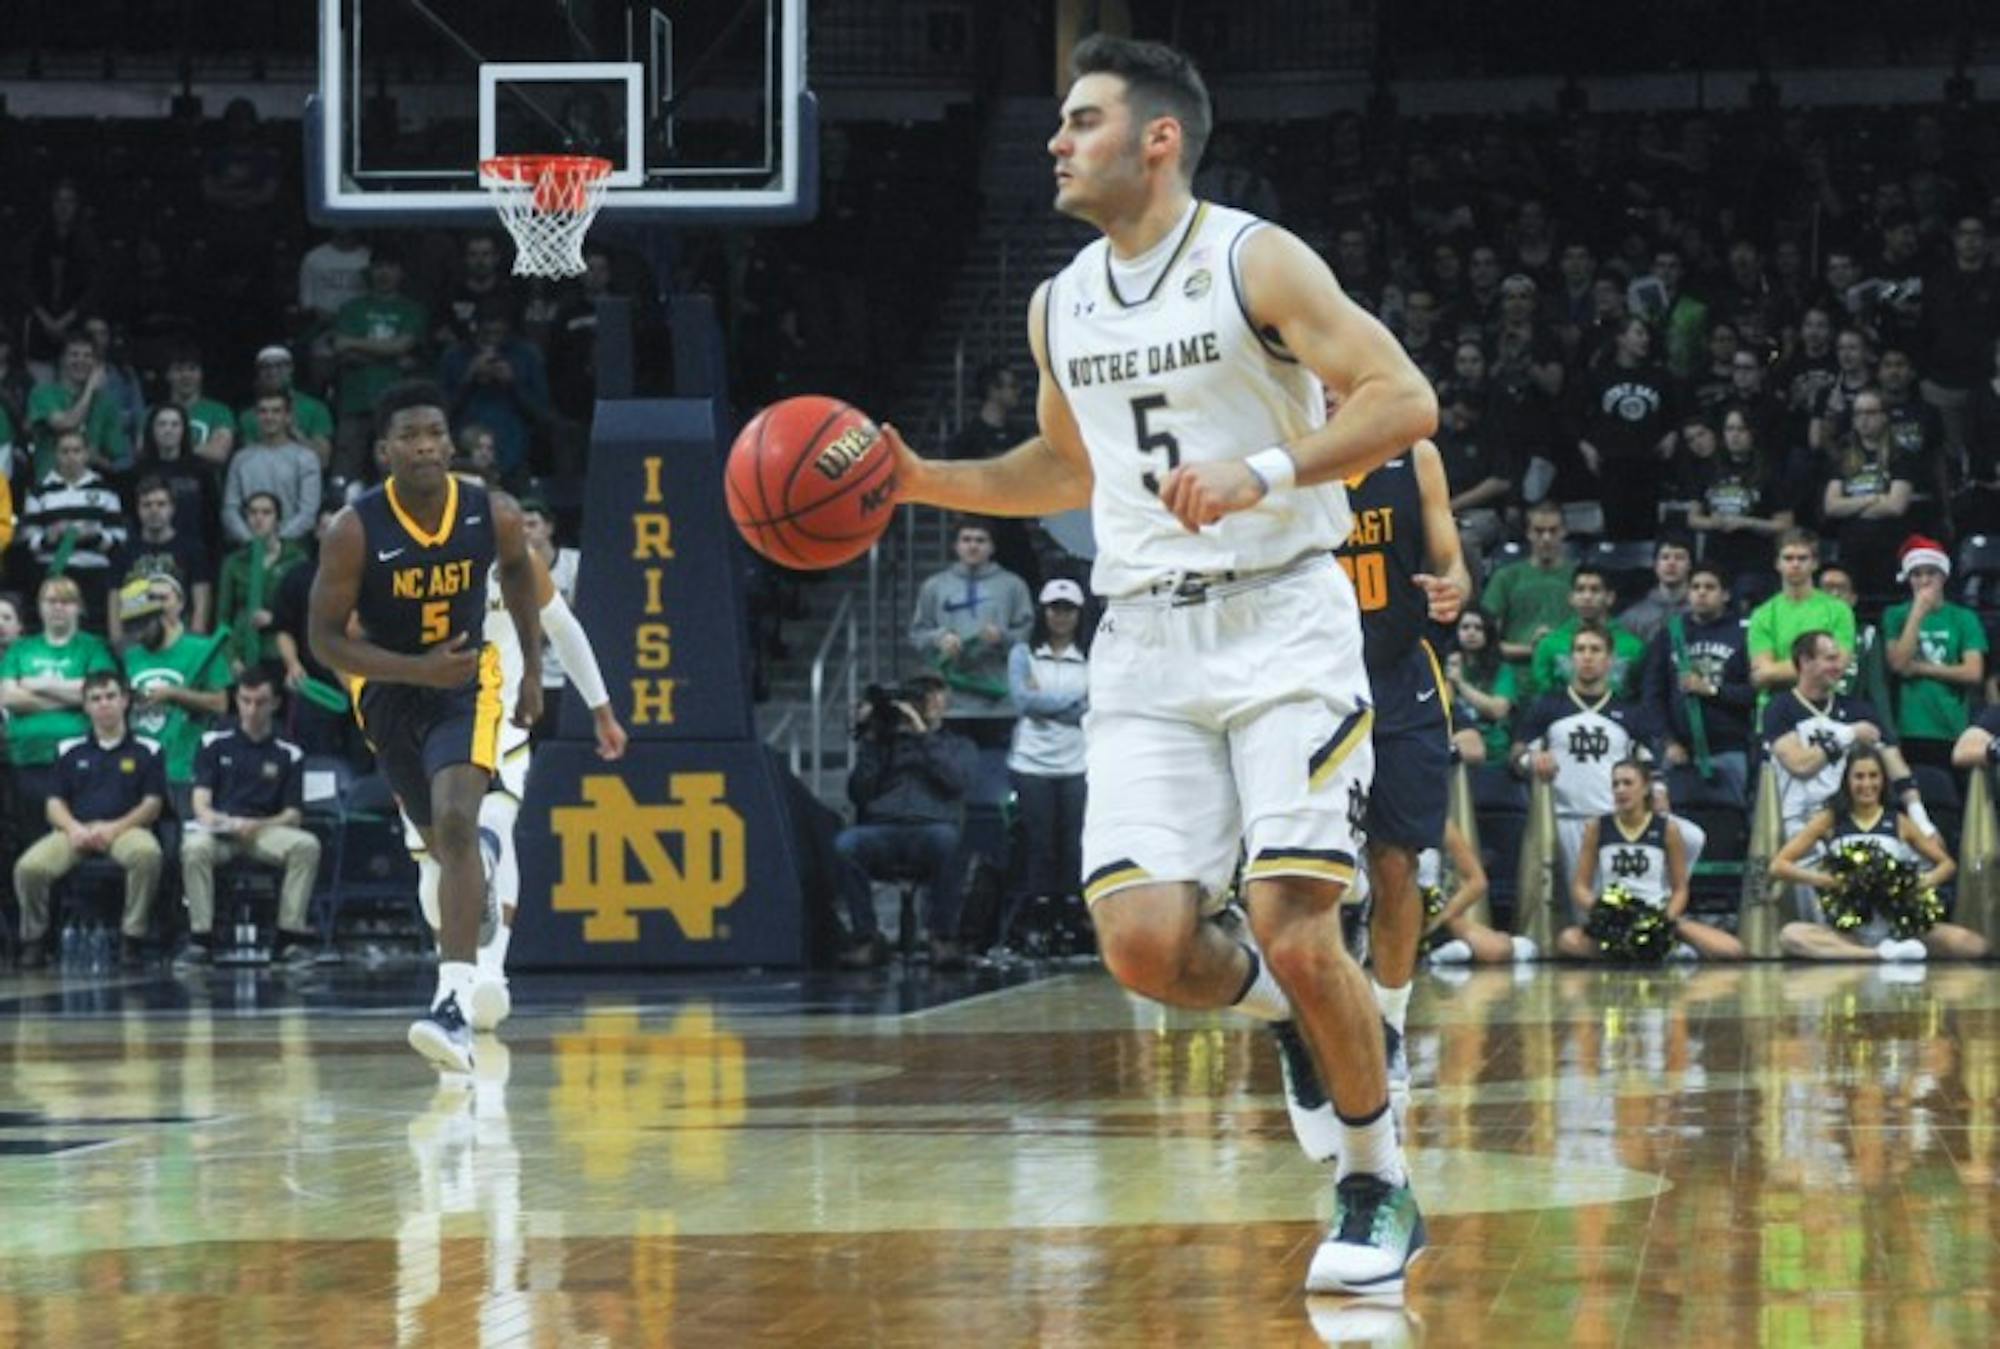 Irish junior guard Matt Farrell brings the ball up the court during Notre Dame‘s 107-53 Dec. 4 win over North Carolina A&T at Purcell Pavilion.